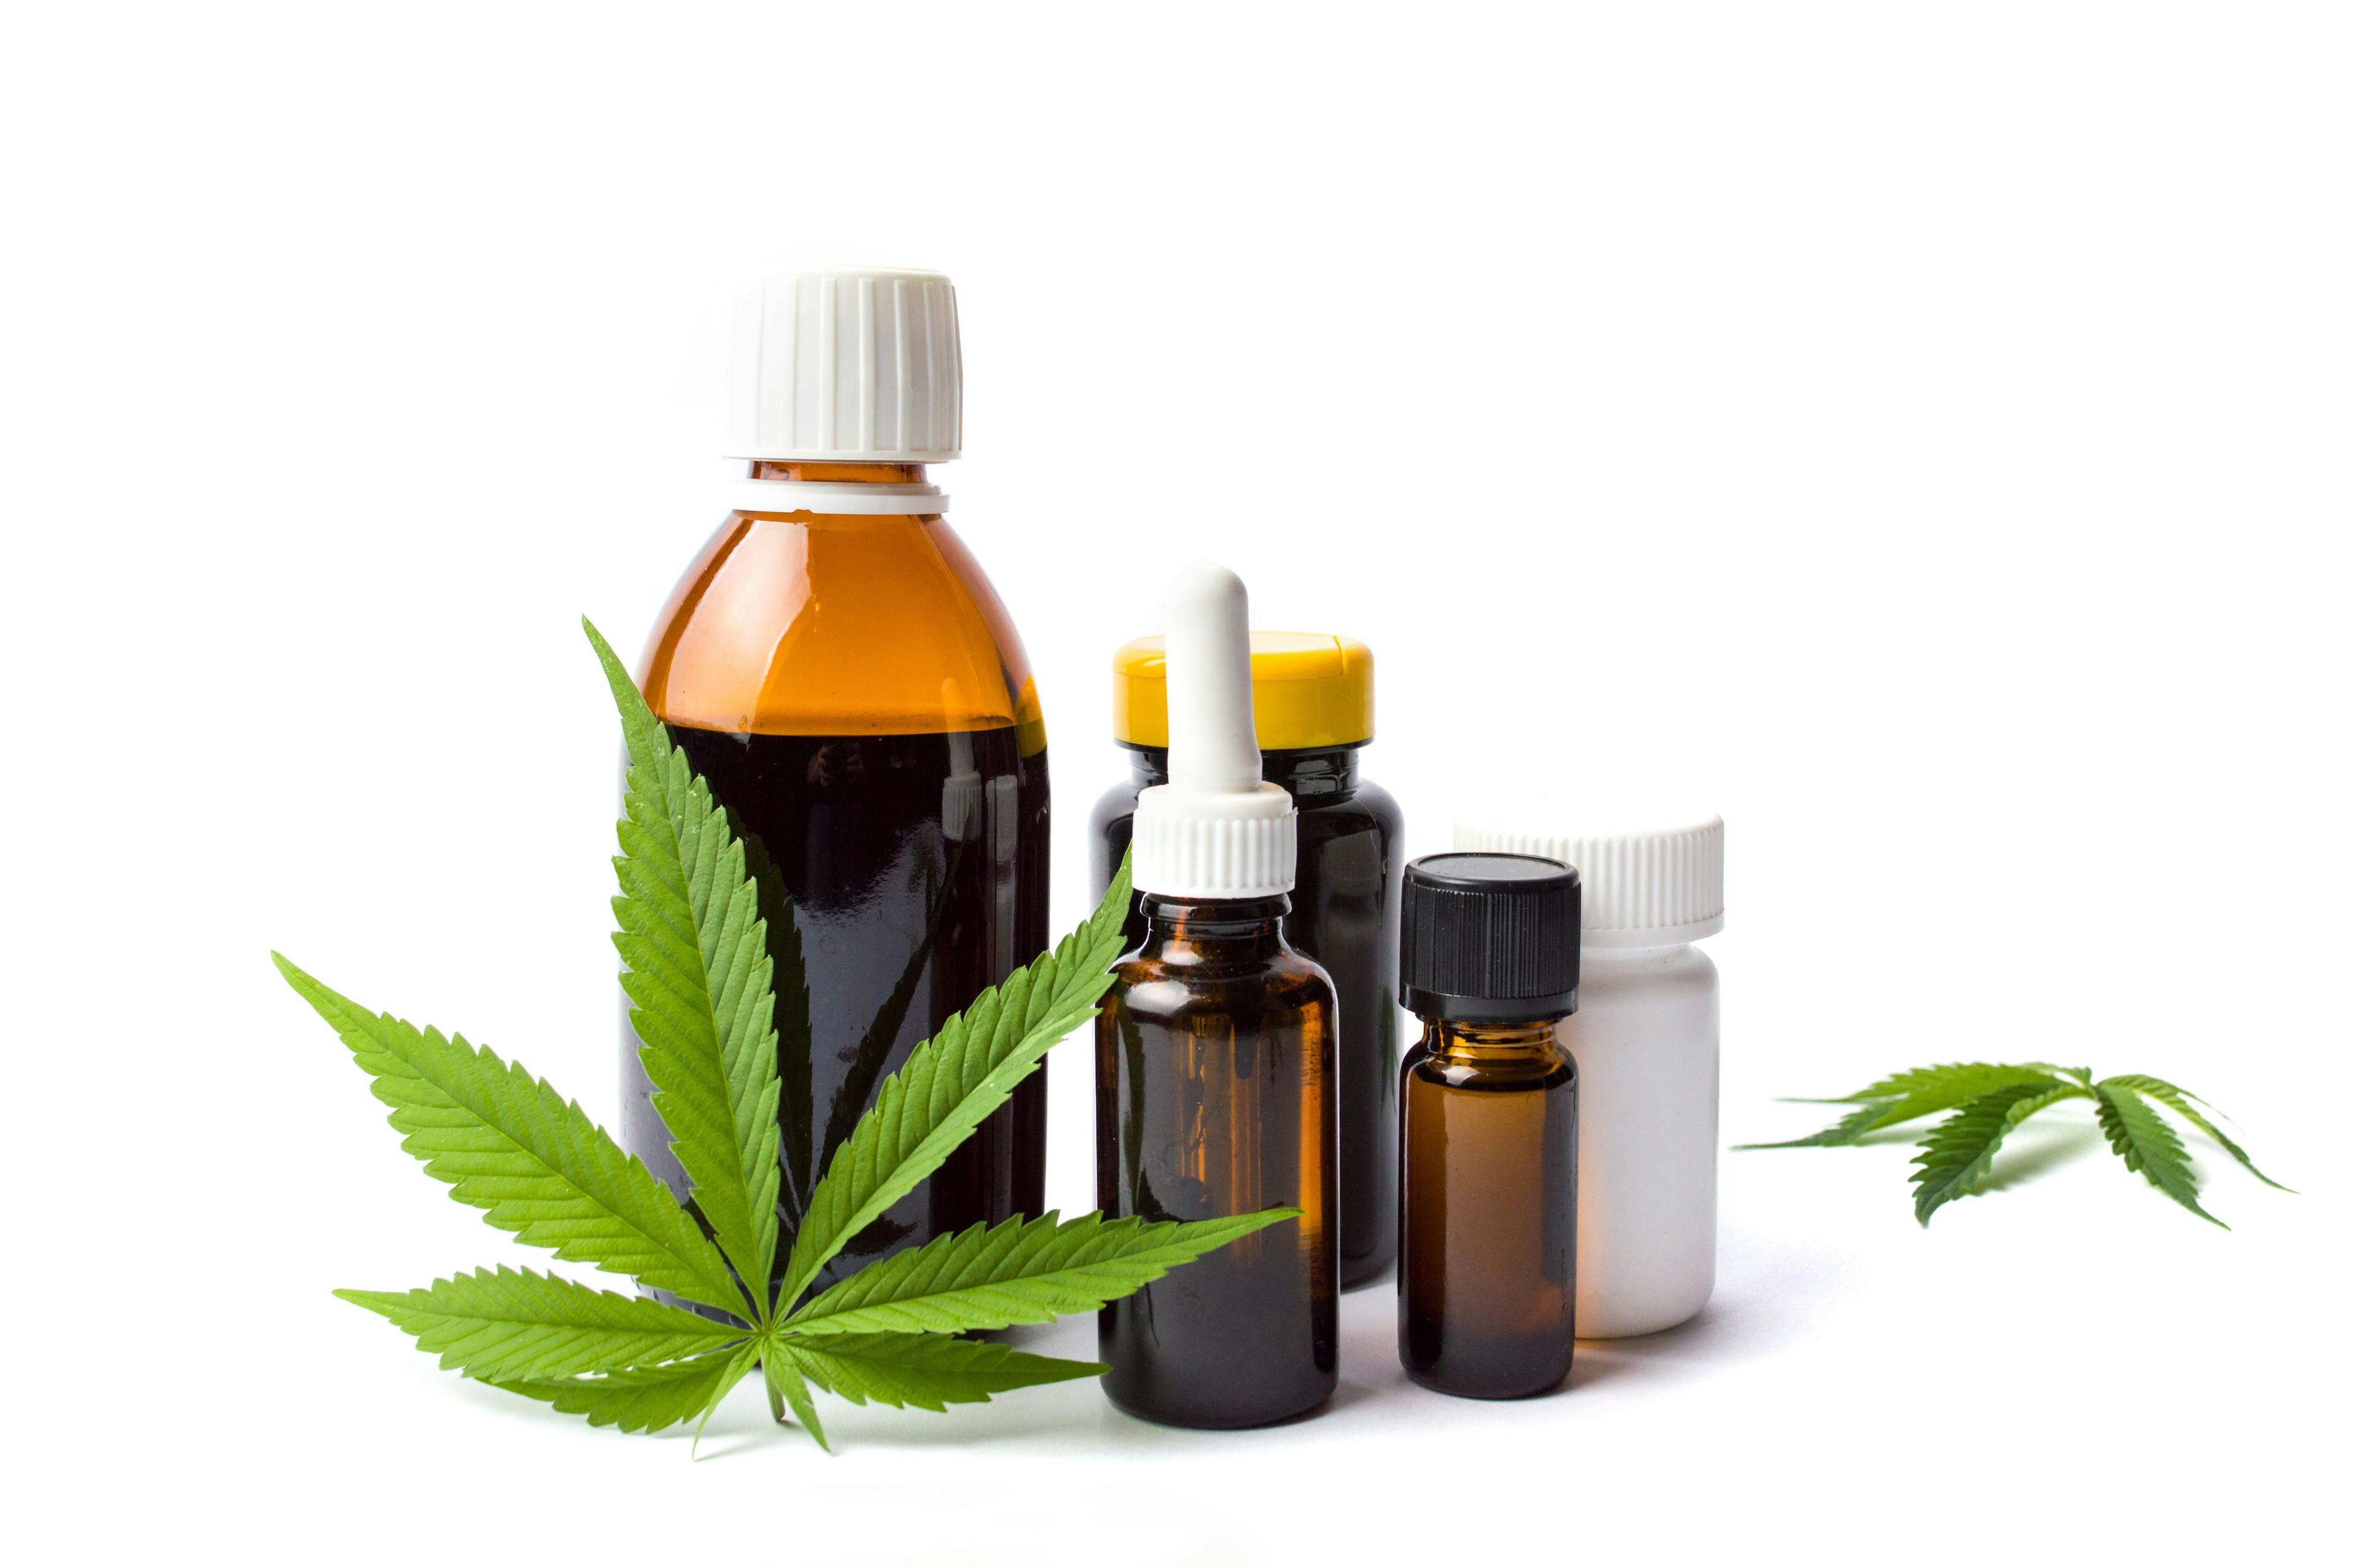 More Research Needed to Identify if Medical Marijuana Effectively Reduces Common Chemotherapy Side Effects